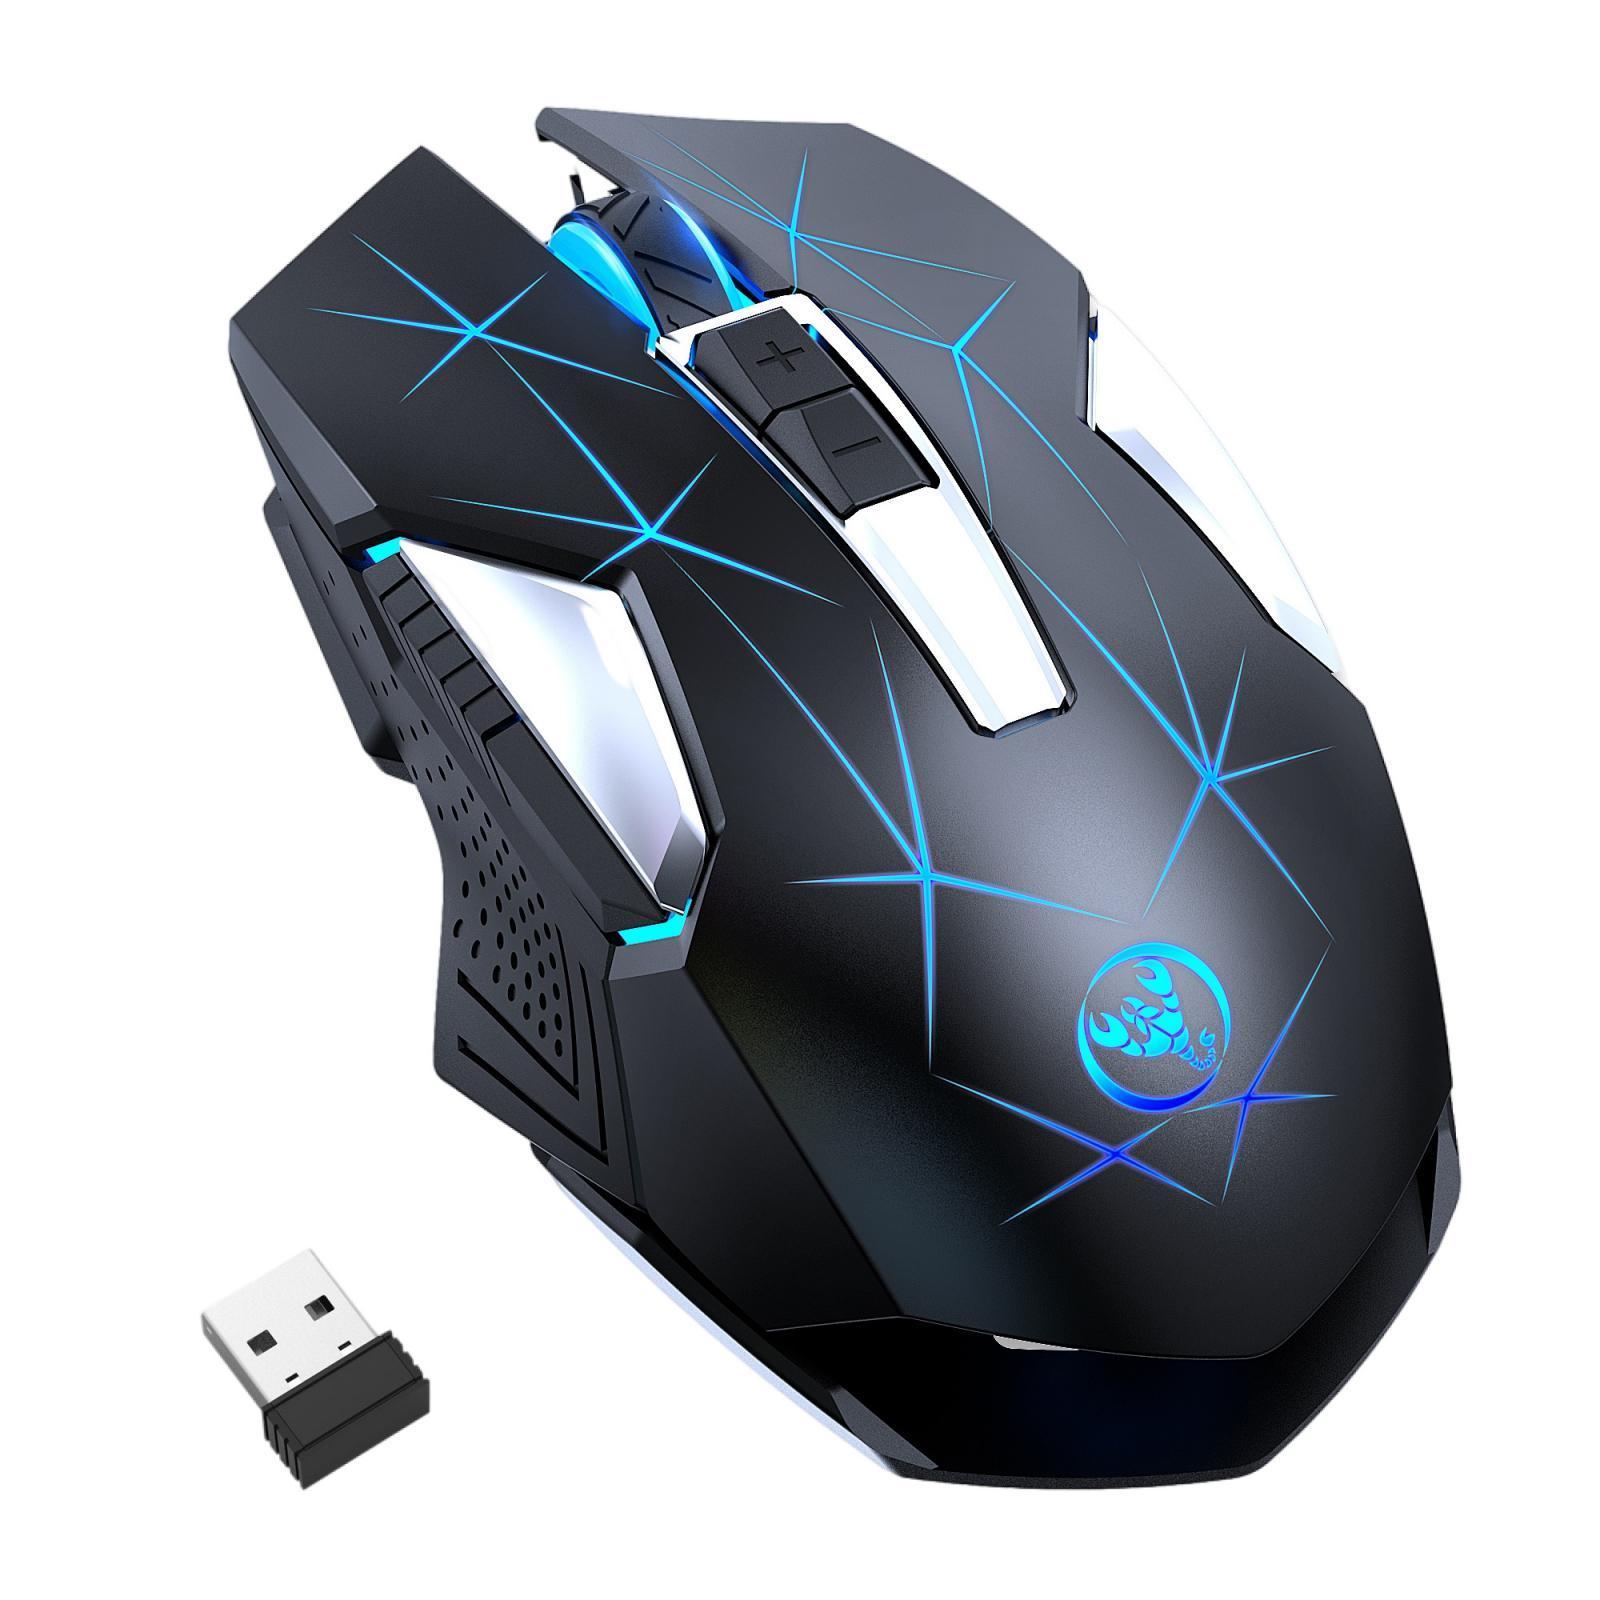 2.4G Wireless Mouse Gaming Mice 3 Adjustable DPI Levels 2400DPI Rechargeable for PC Desktop